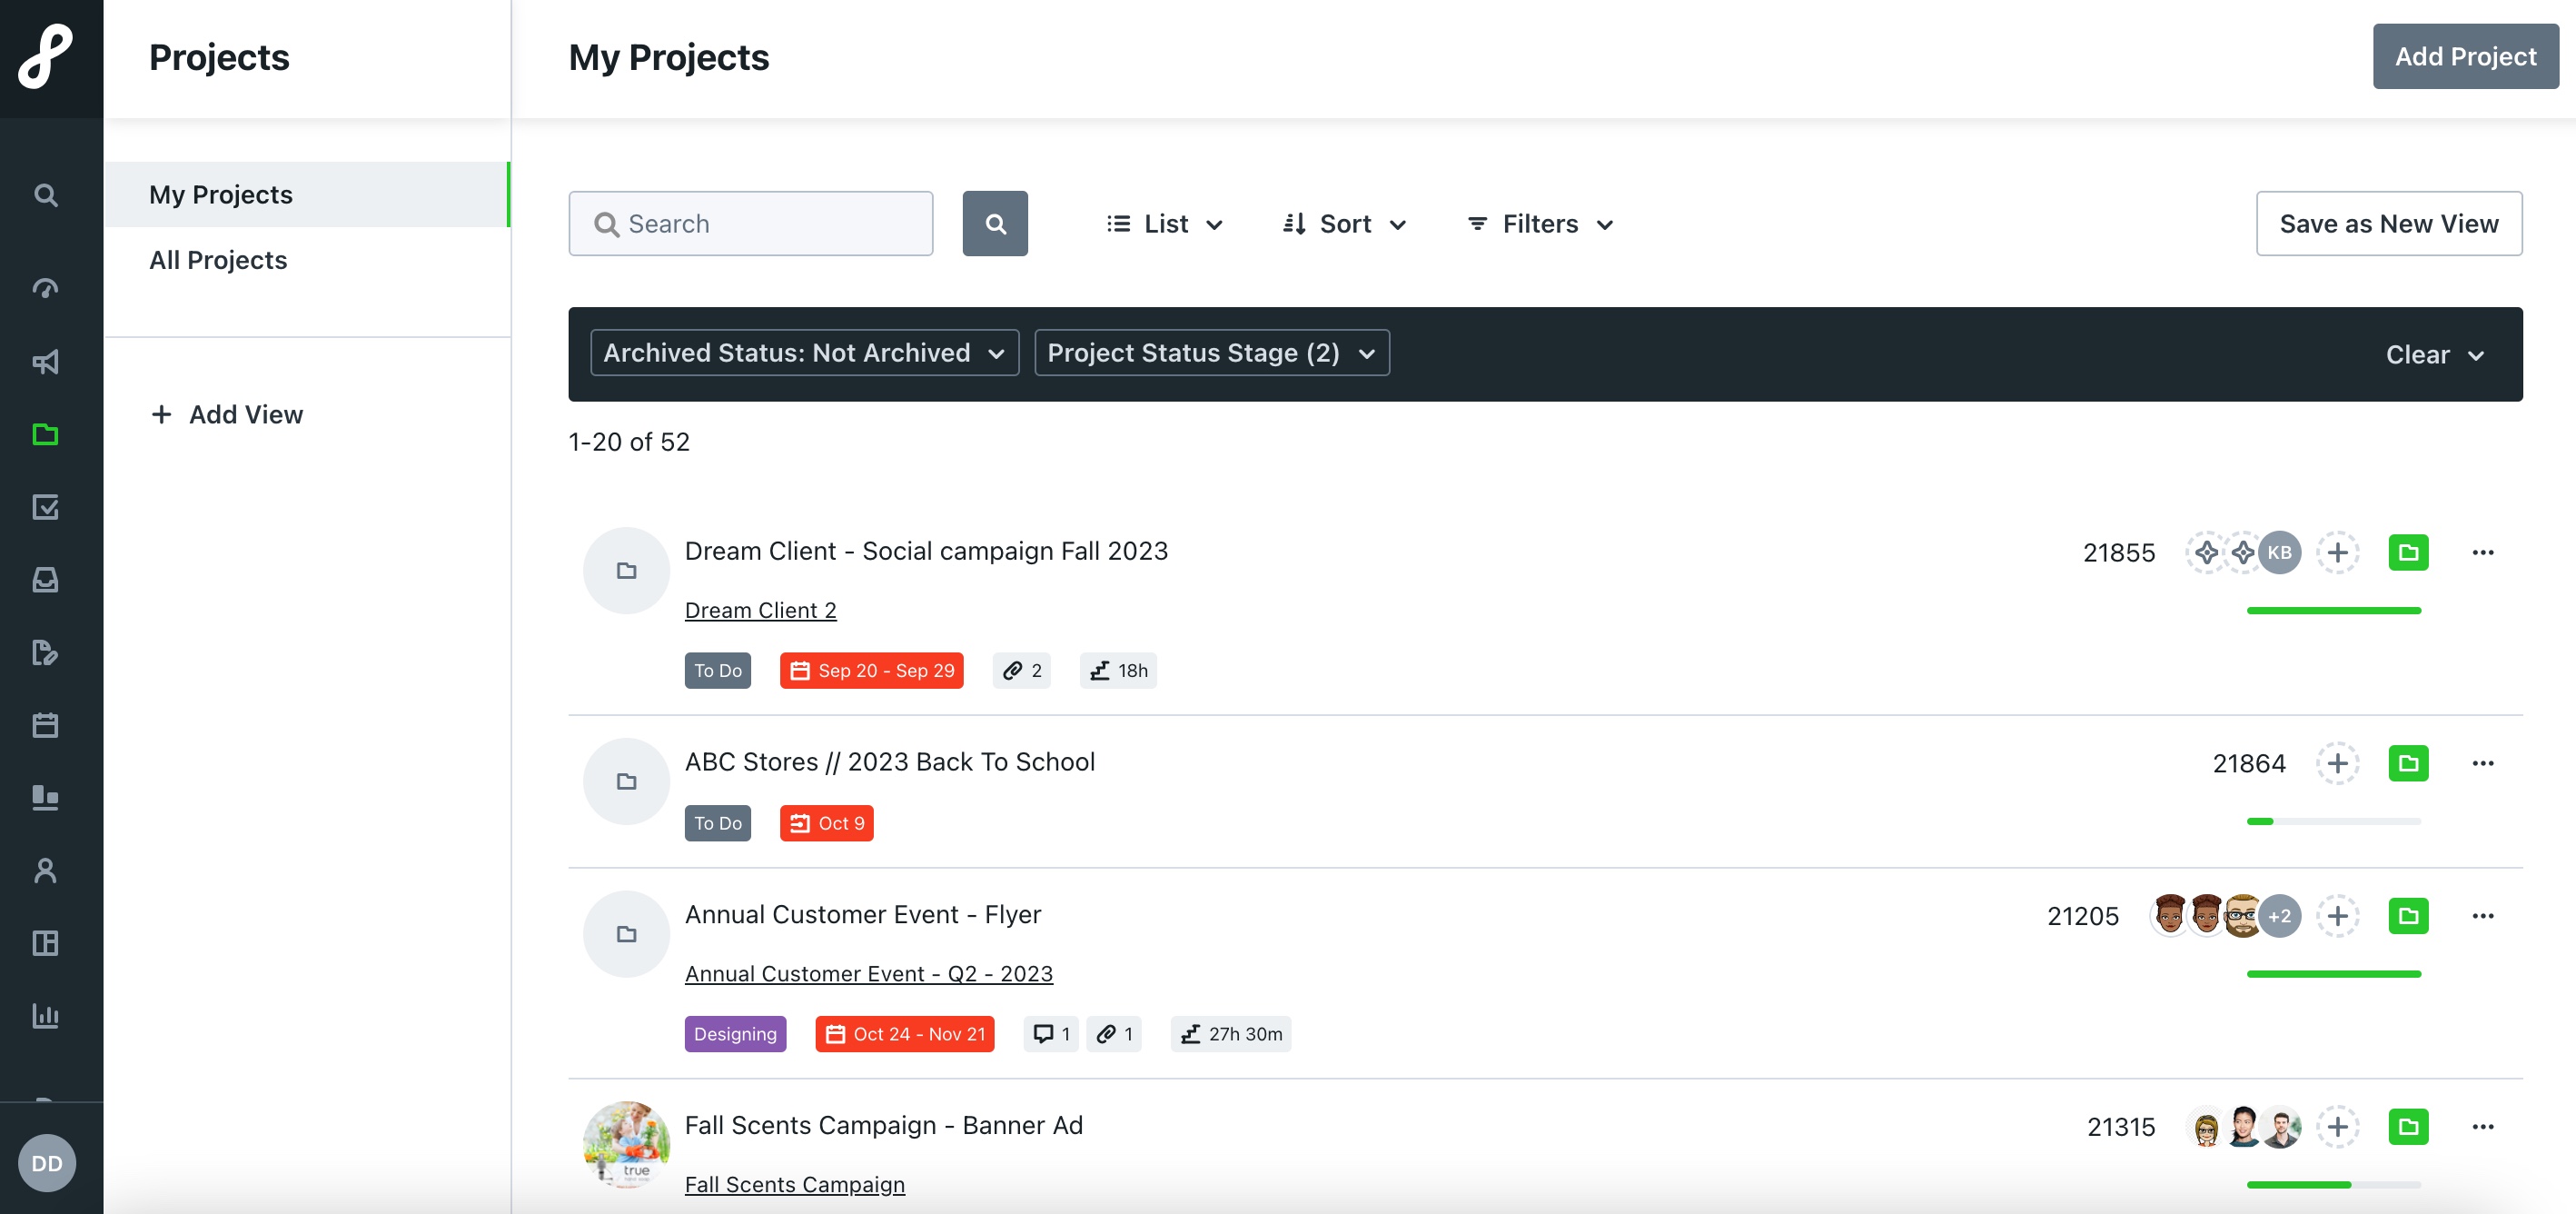 Project Management: View all project details, tasks, timelines, feedback, and more.